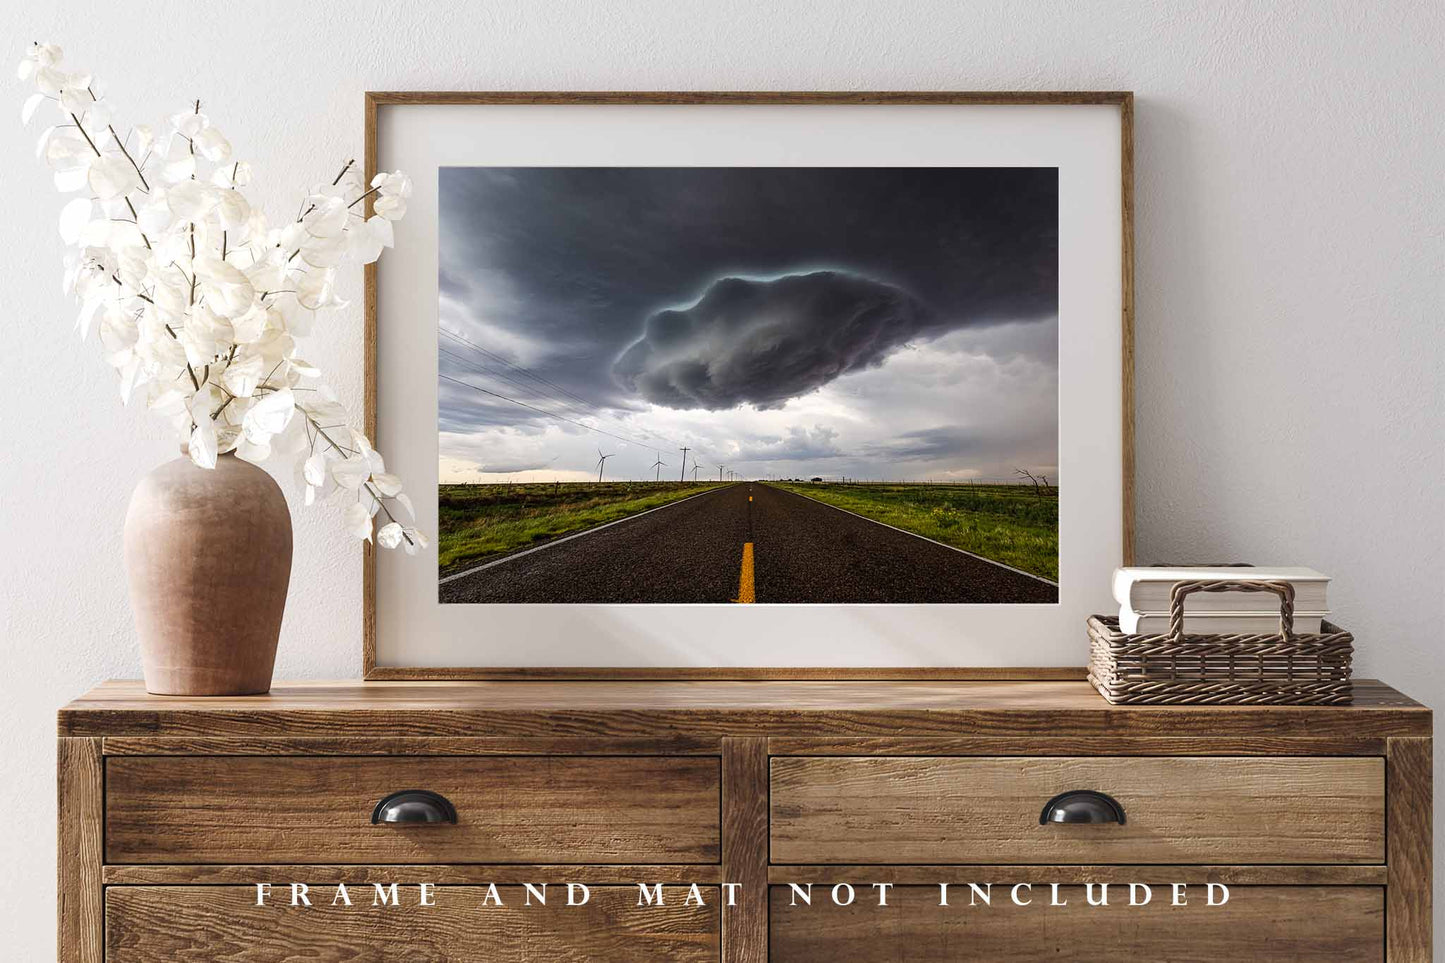 Storm Photography Print (Not Framed) Picture of UFO Shaped Wall Cloud Over Highway in New Mexico Supercell Thunderstorm Wall Art Adventure Decor